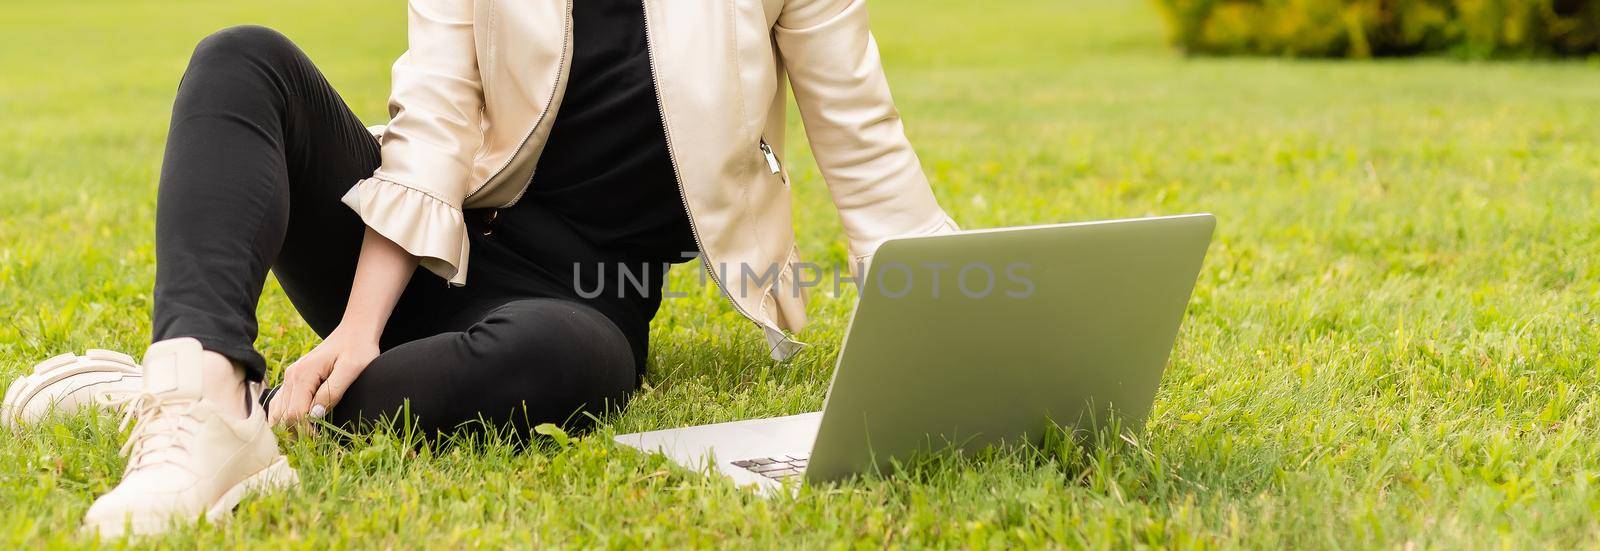 Female copywriter working on laptop in the park, view over the shoulder.